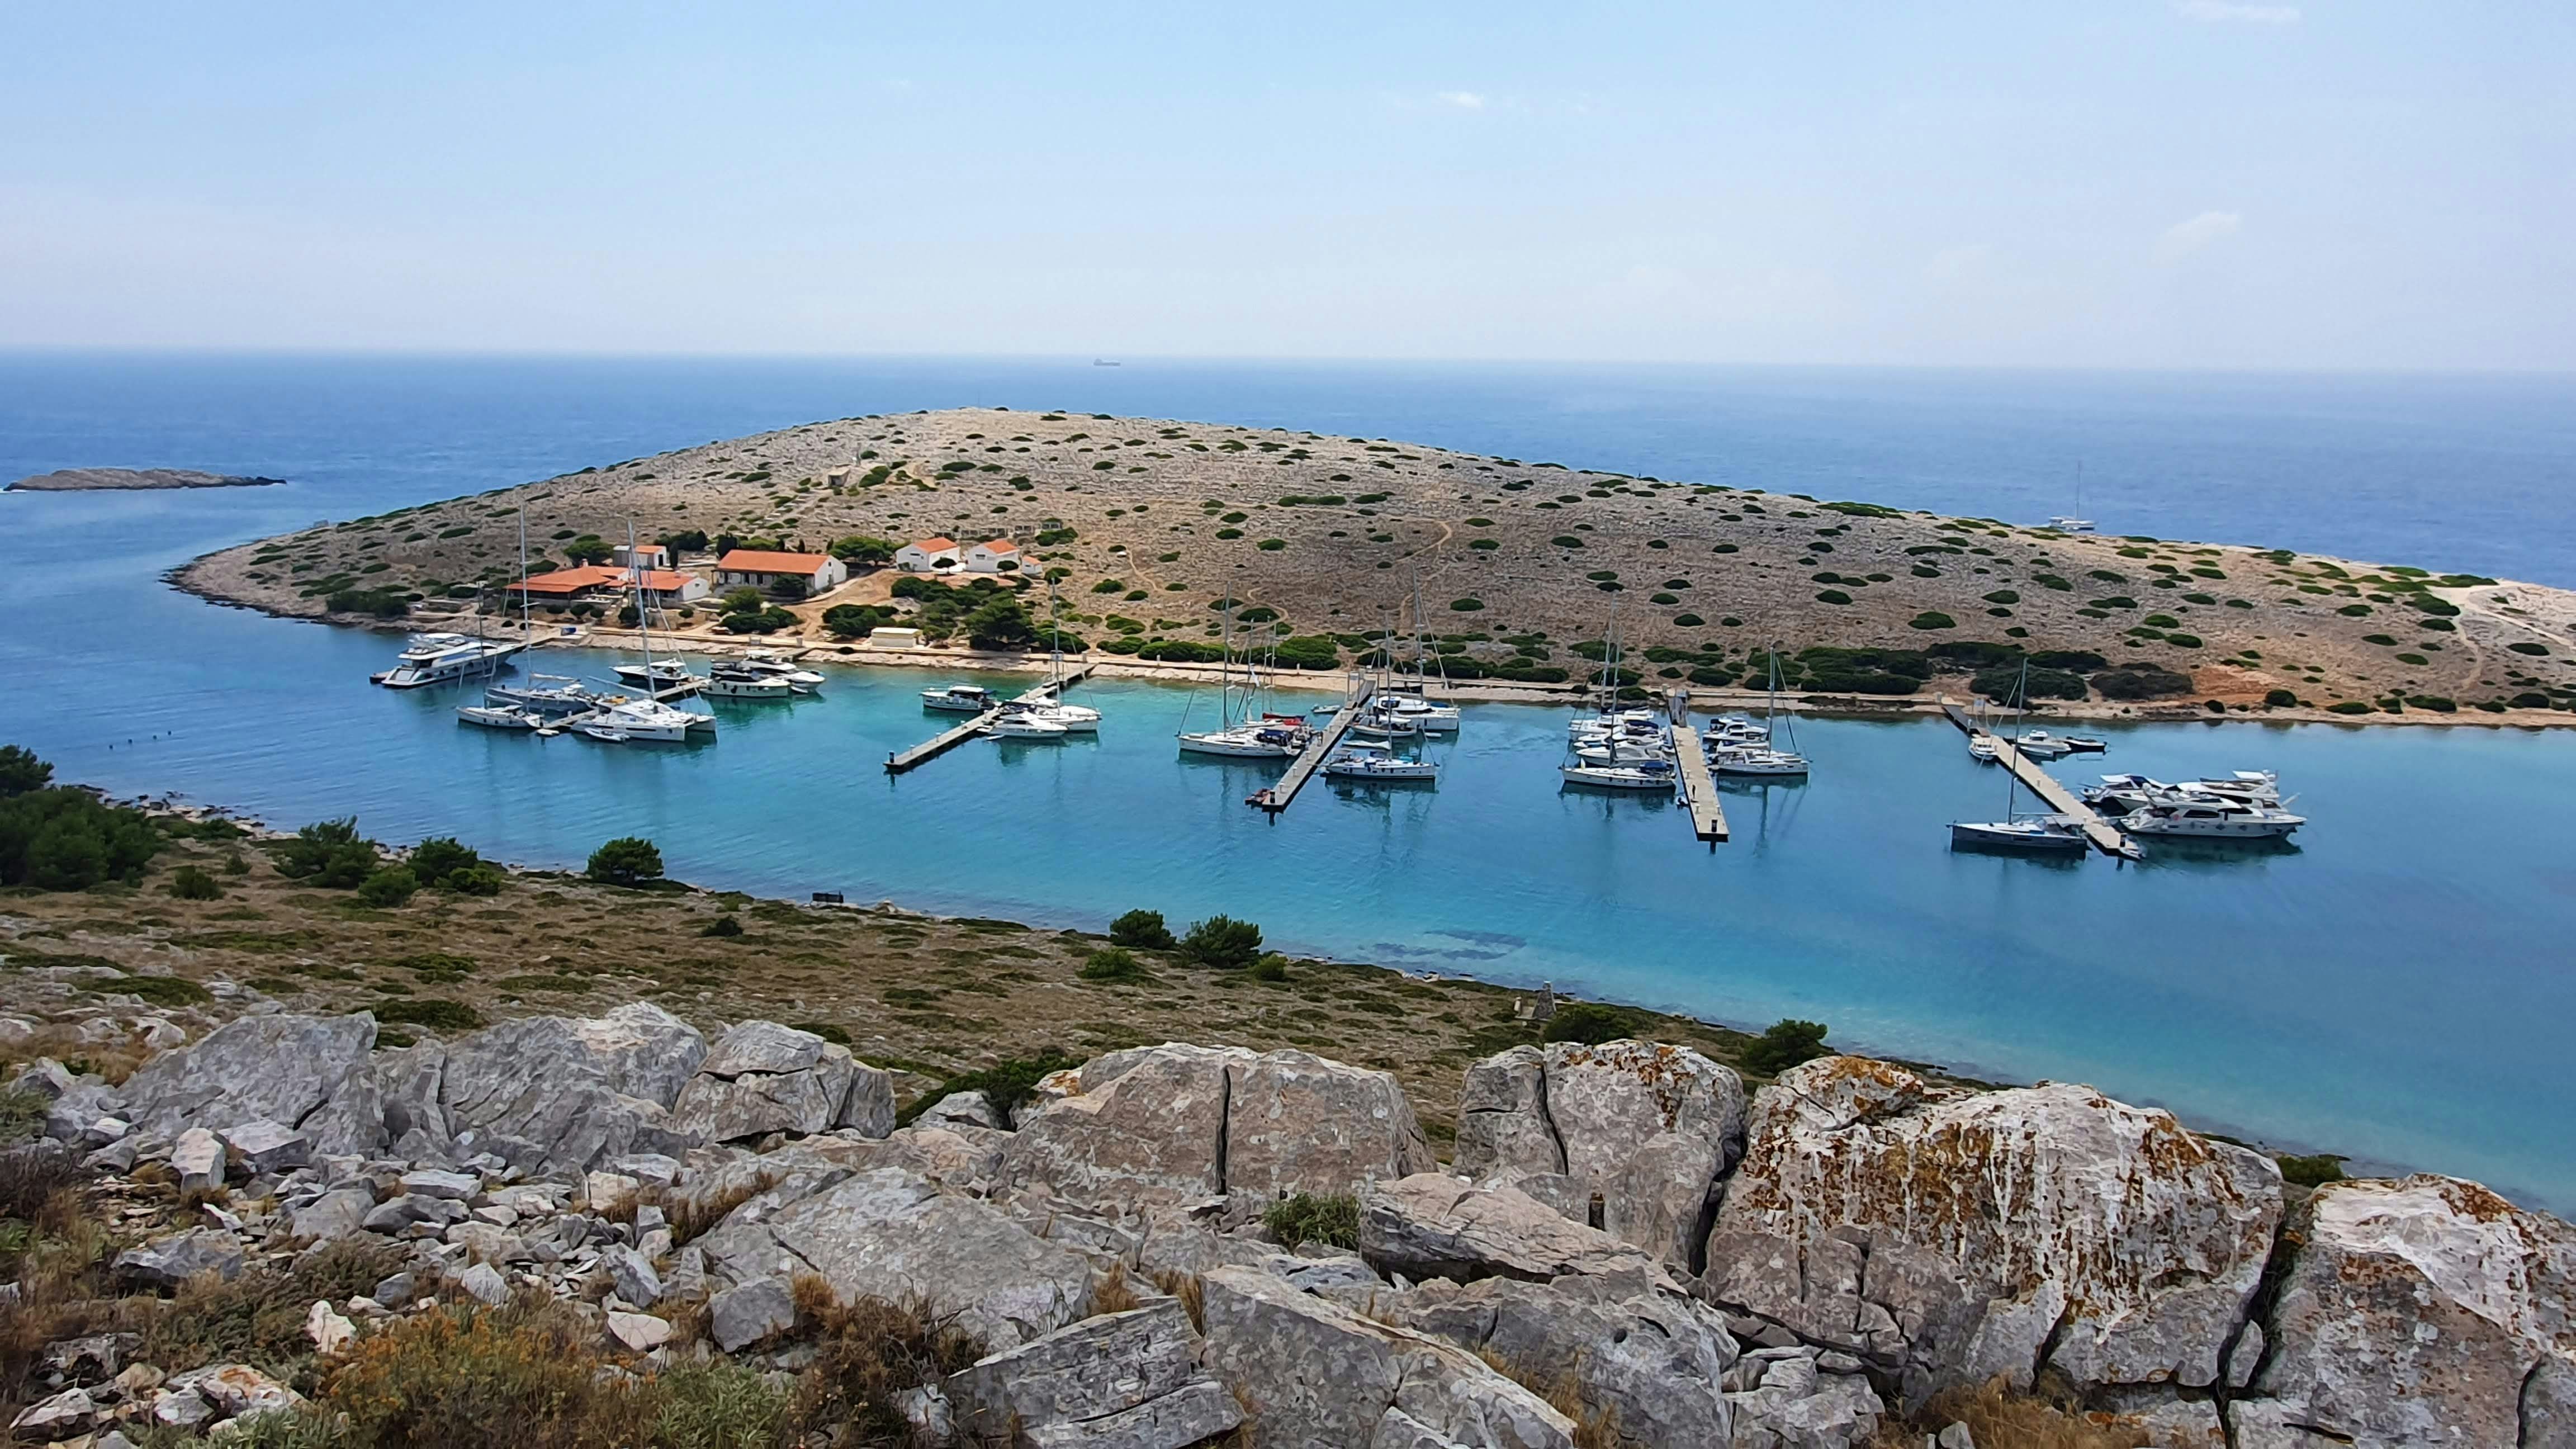 The ACI Marina Piškera is not only beautiful and quiet, but you also get a free ticket to Kornati National Park.